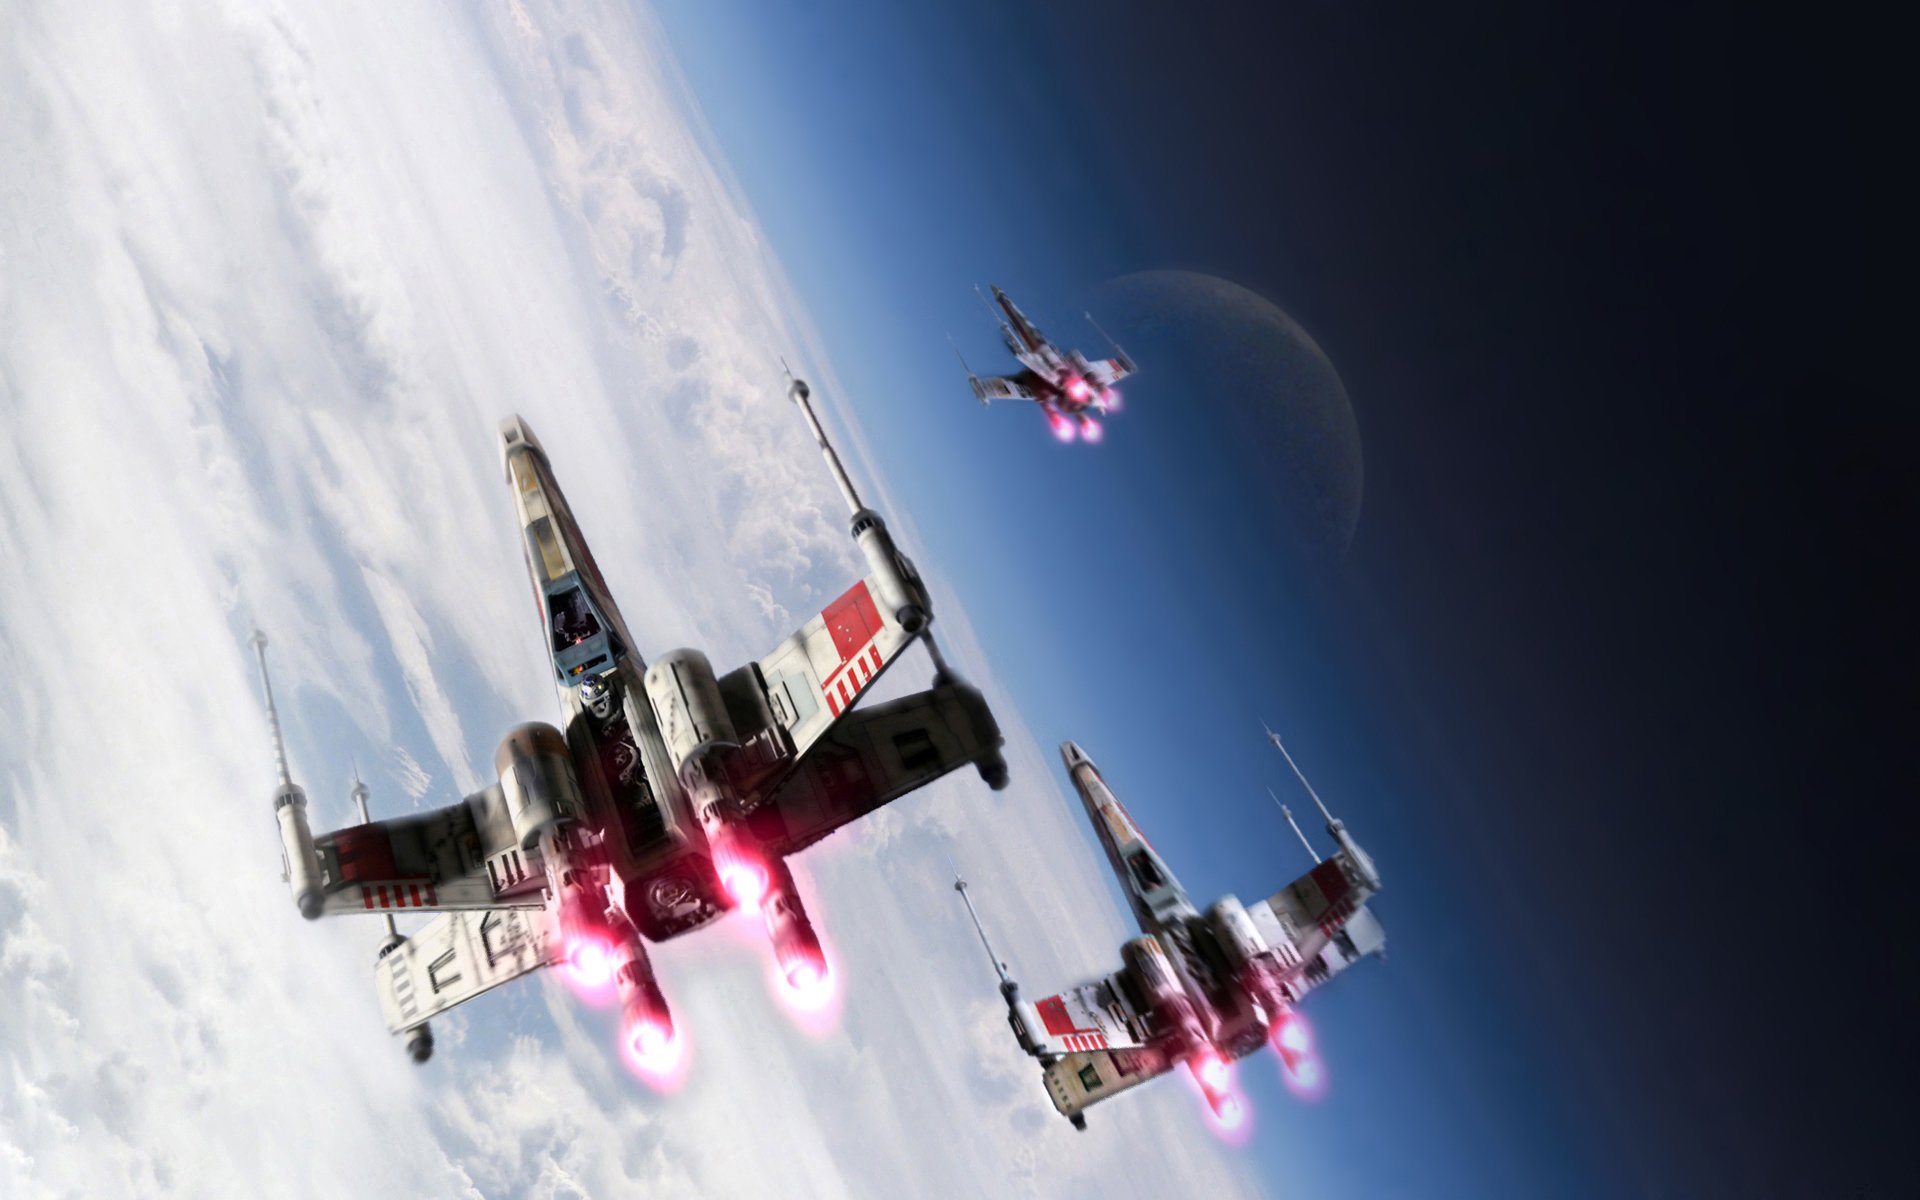 star wars x wing wallpaper,extreme sport,air racing,air sports,freestyle skiing,slopestyle